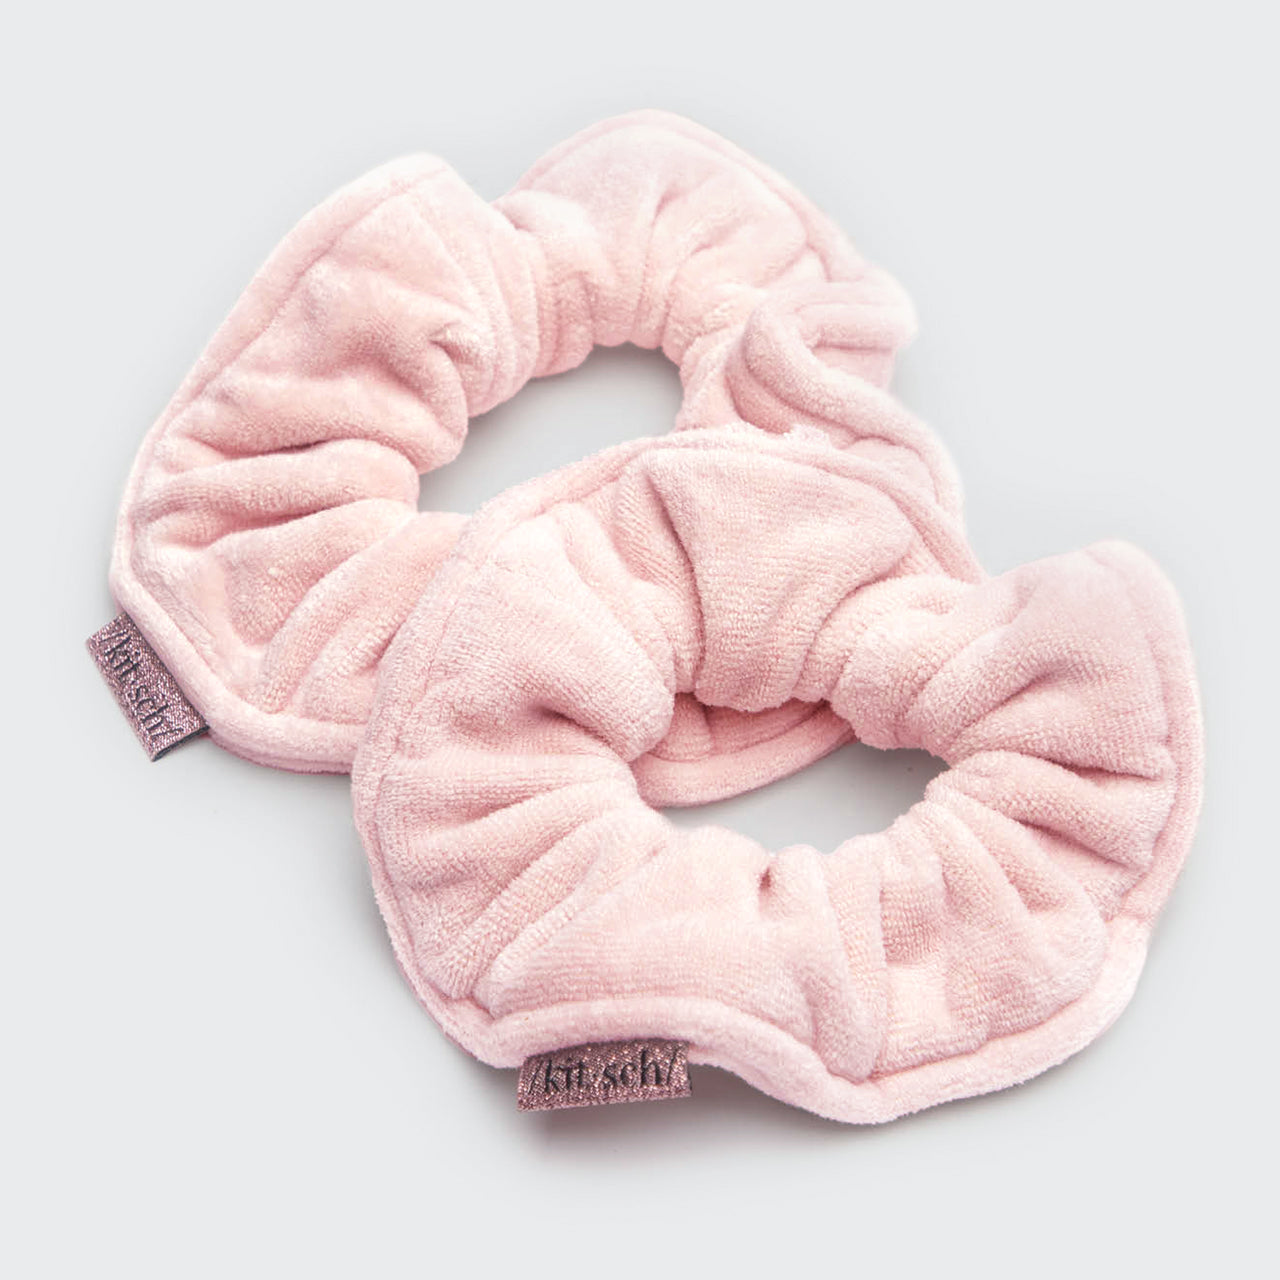 Towel Scrunchie 2 Pack - Blush by KITSCH - Lotus and Willow